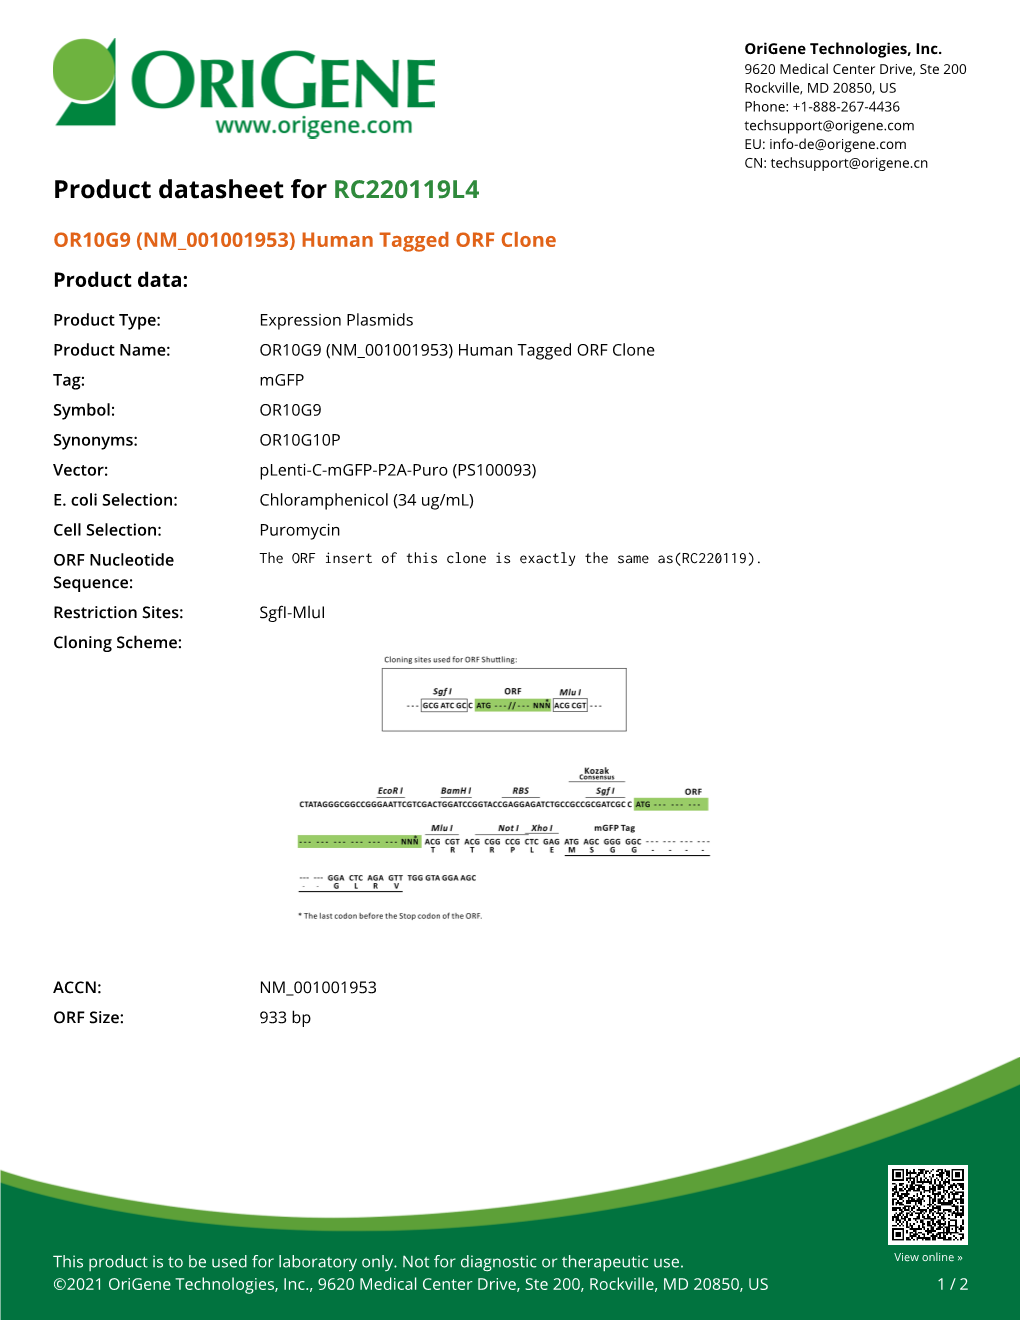 OR10G9 (NM 001001953) Human Tagged ORF Clone Product Data